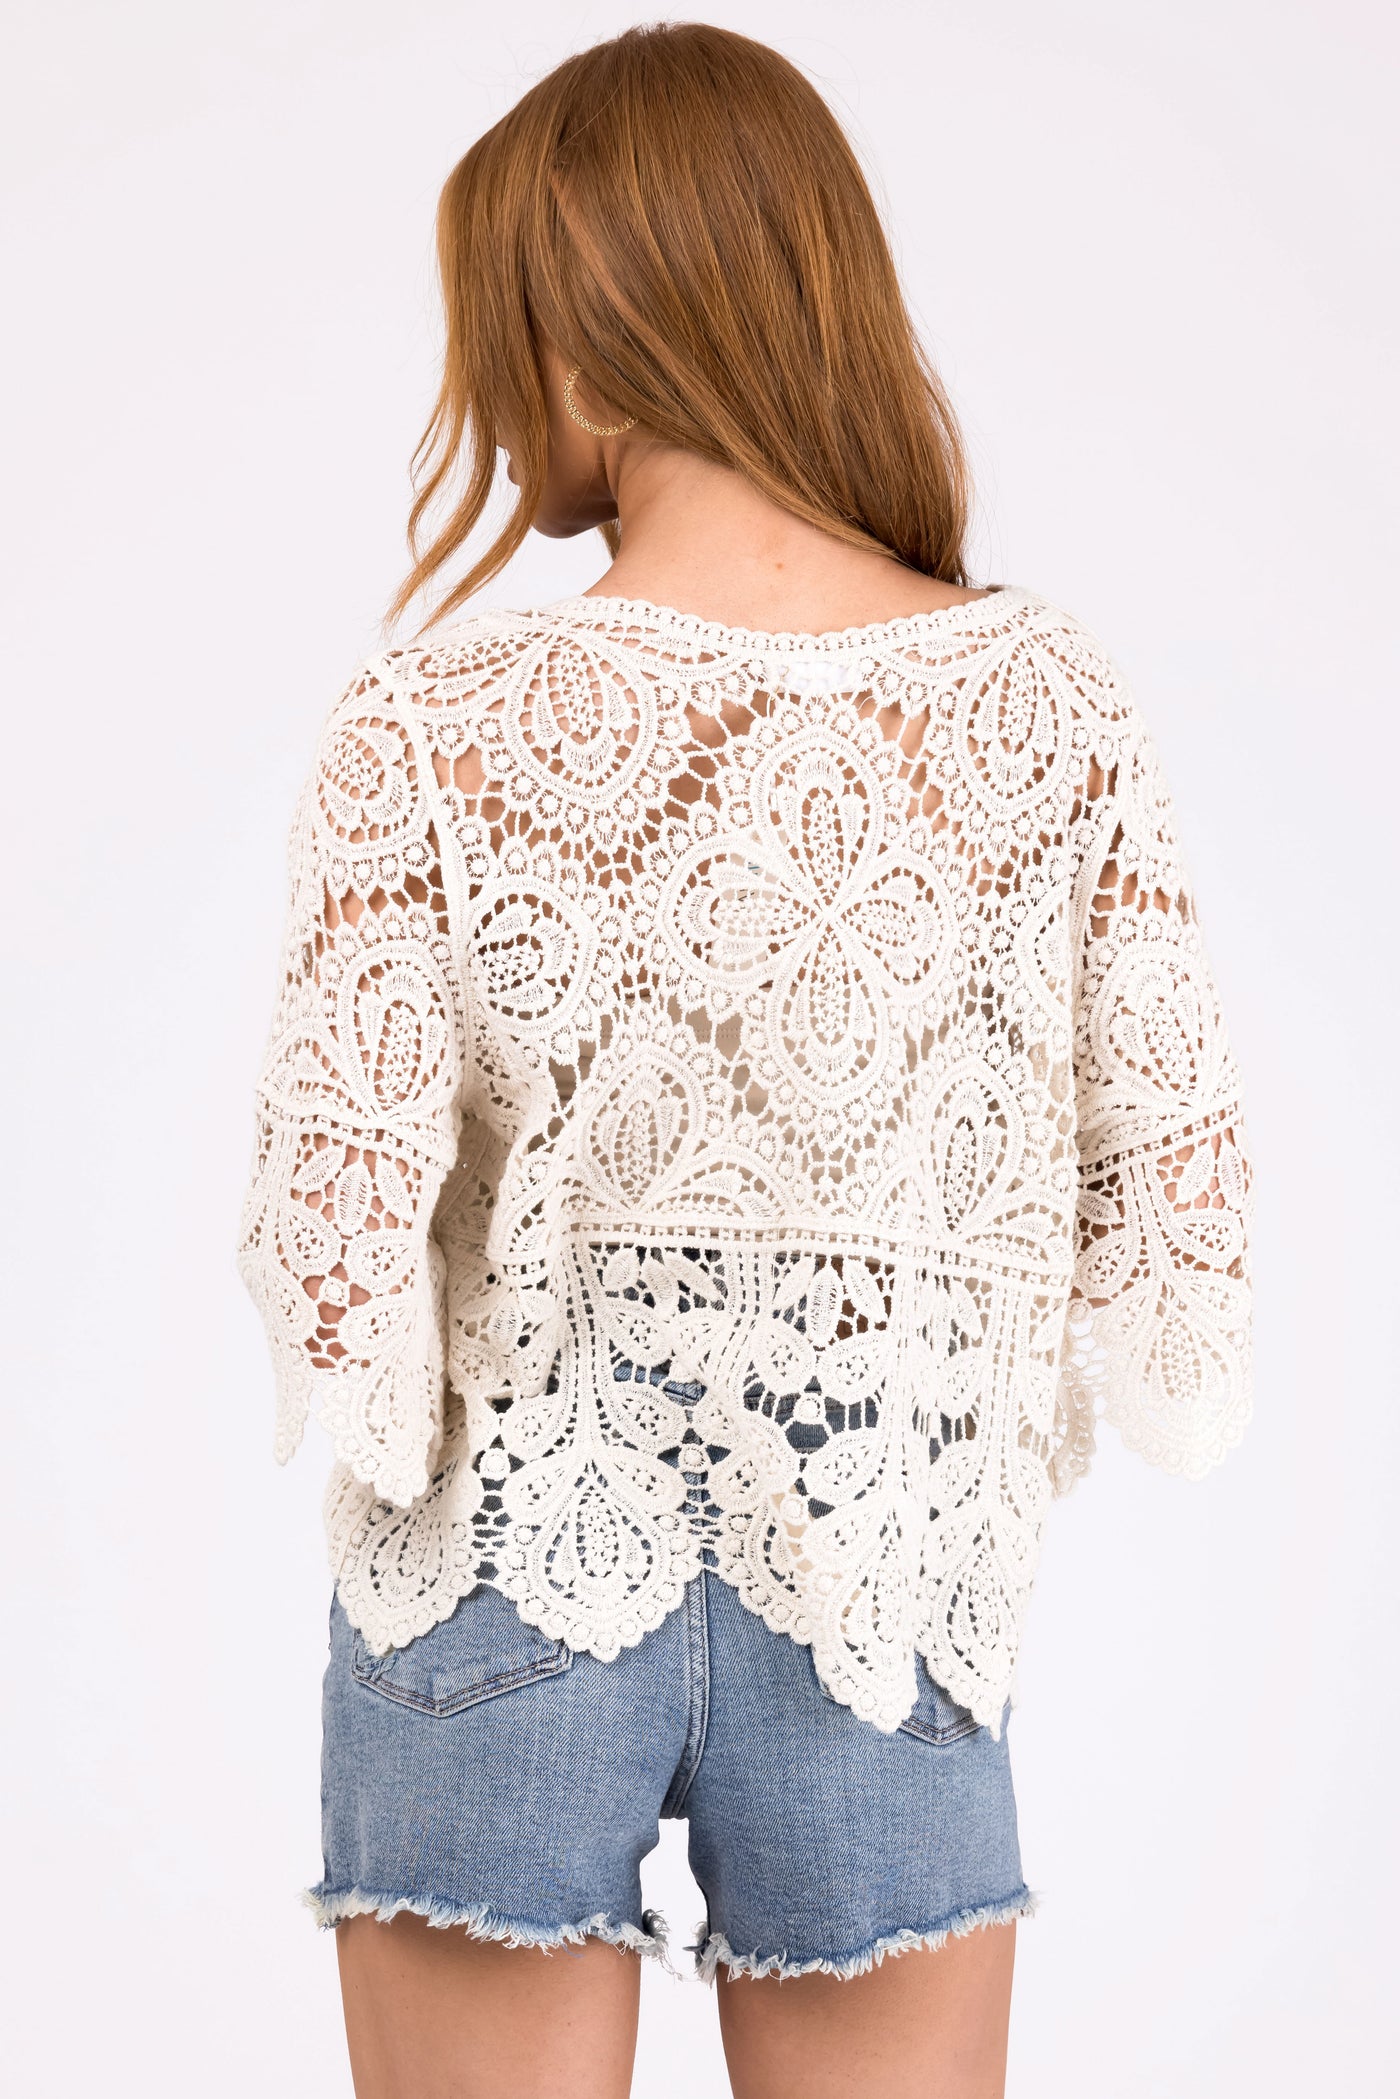 Natural Crochet Lace Scalloped Half Sleeve Top